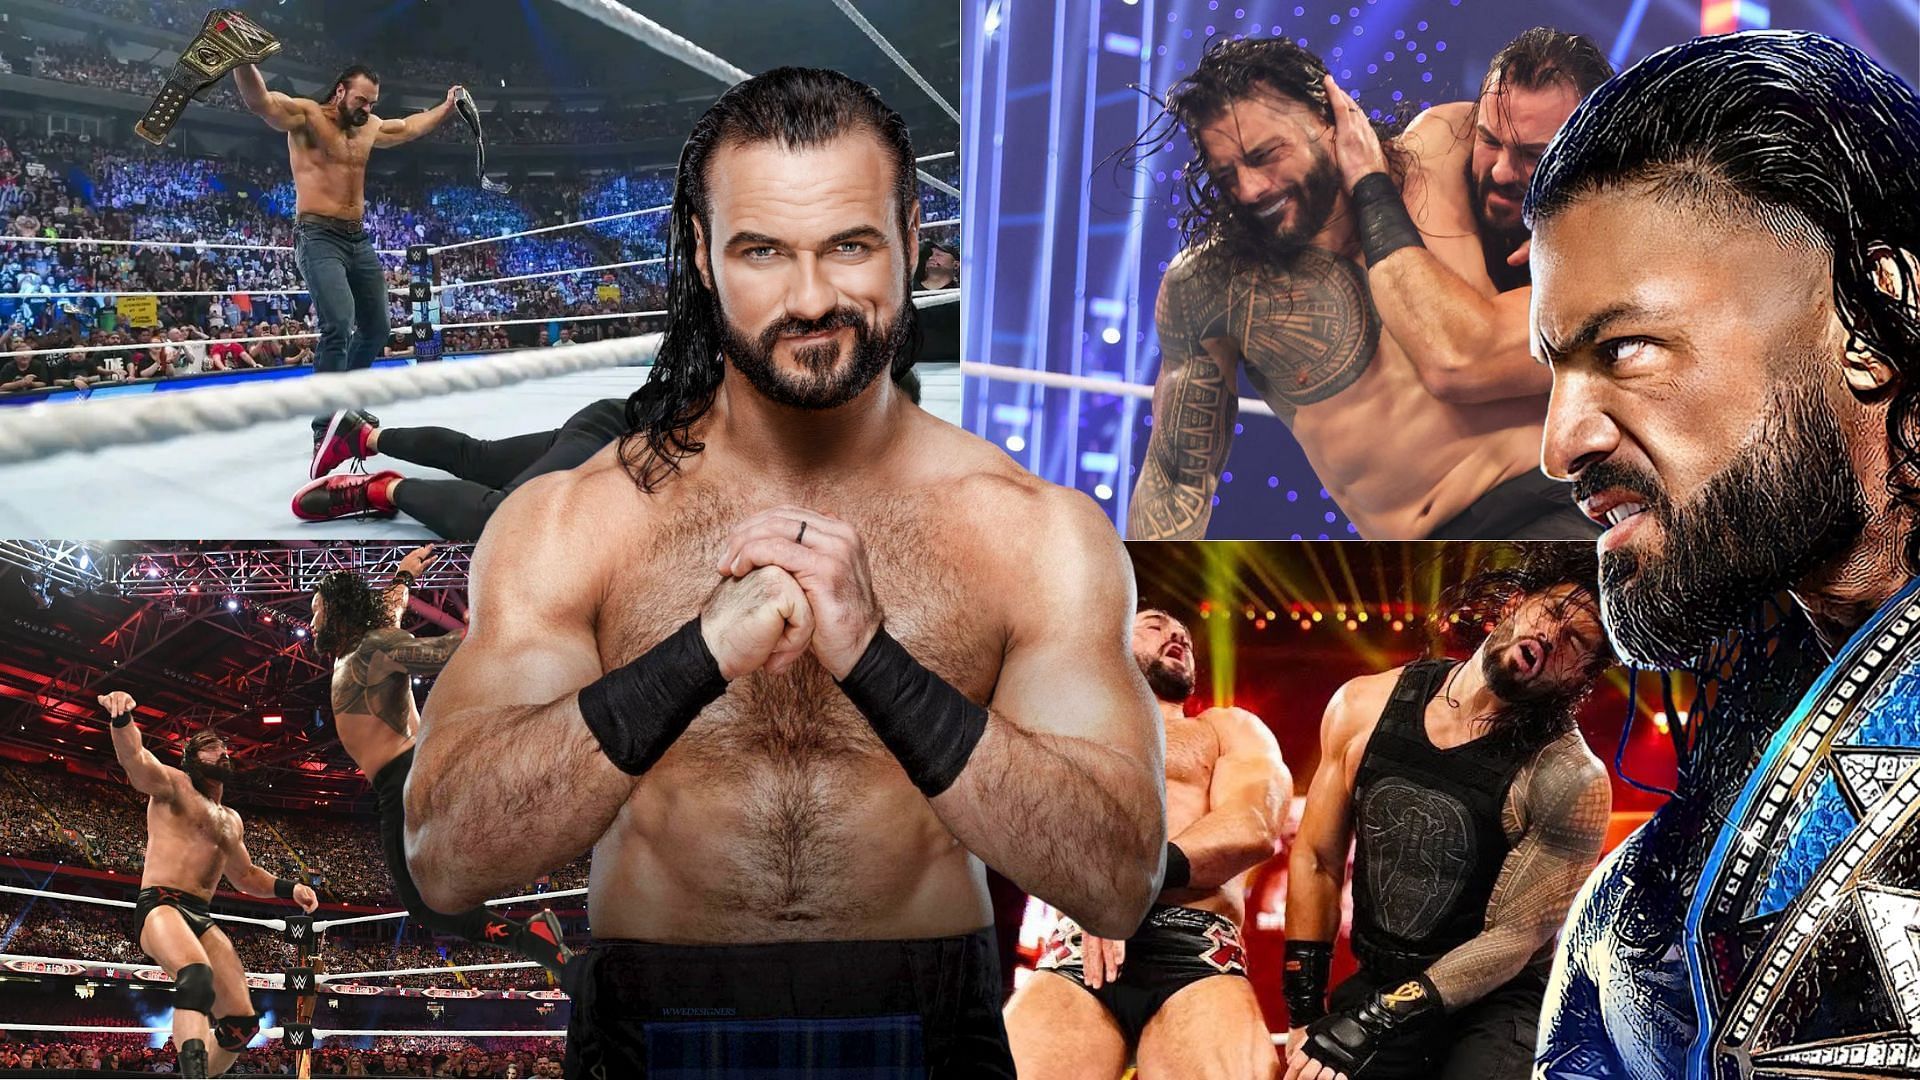 Drew McIntyre is the perfect choice to dethrone Roman Reigns